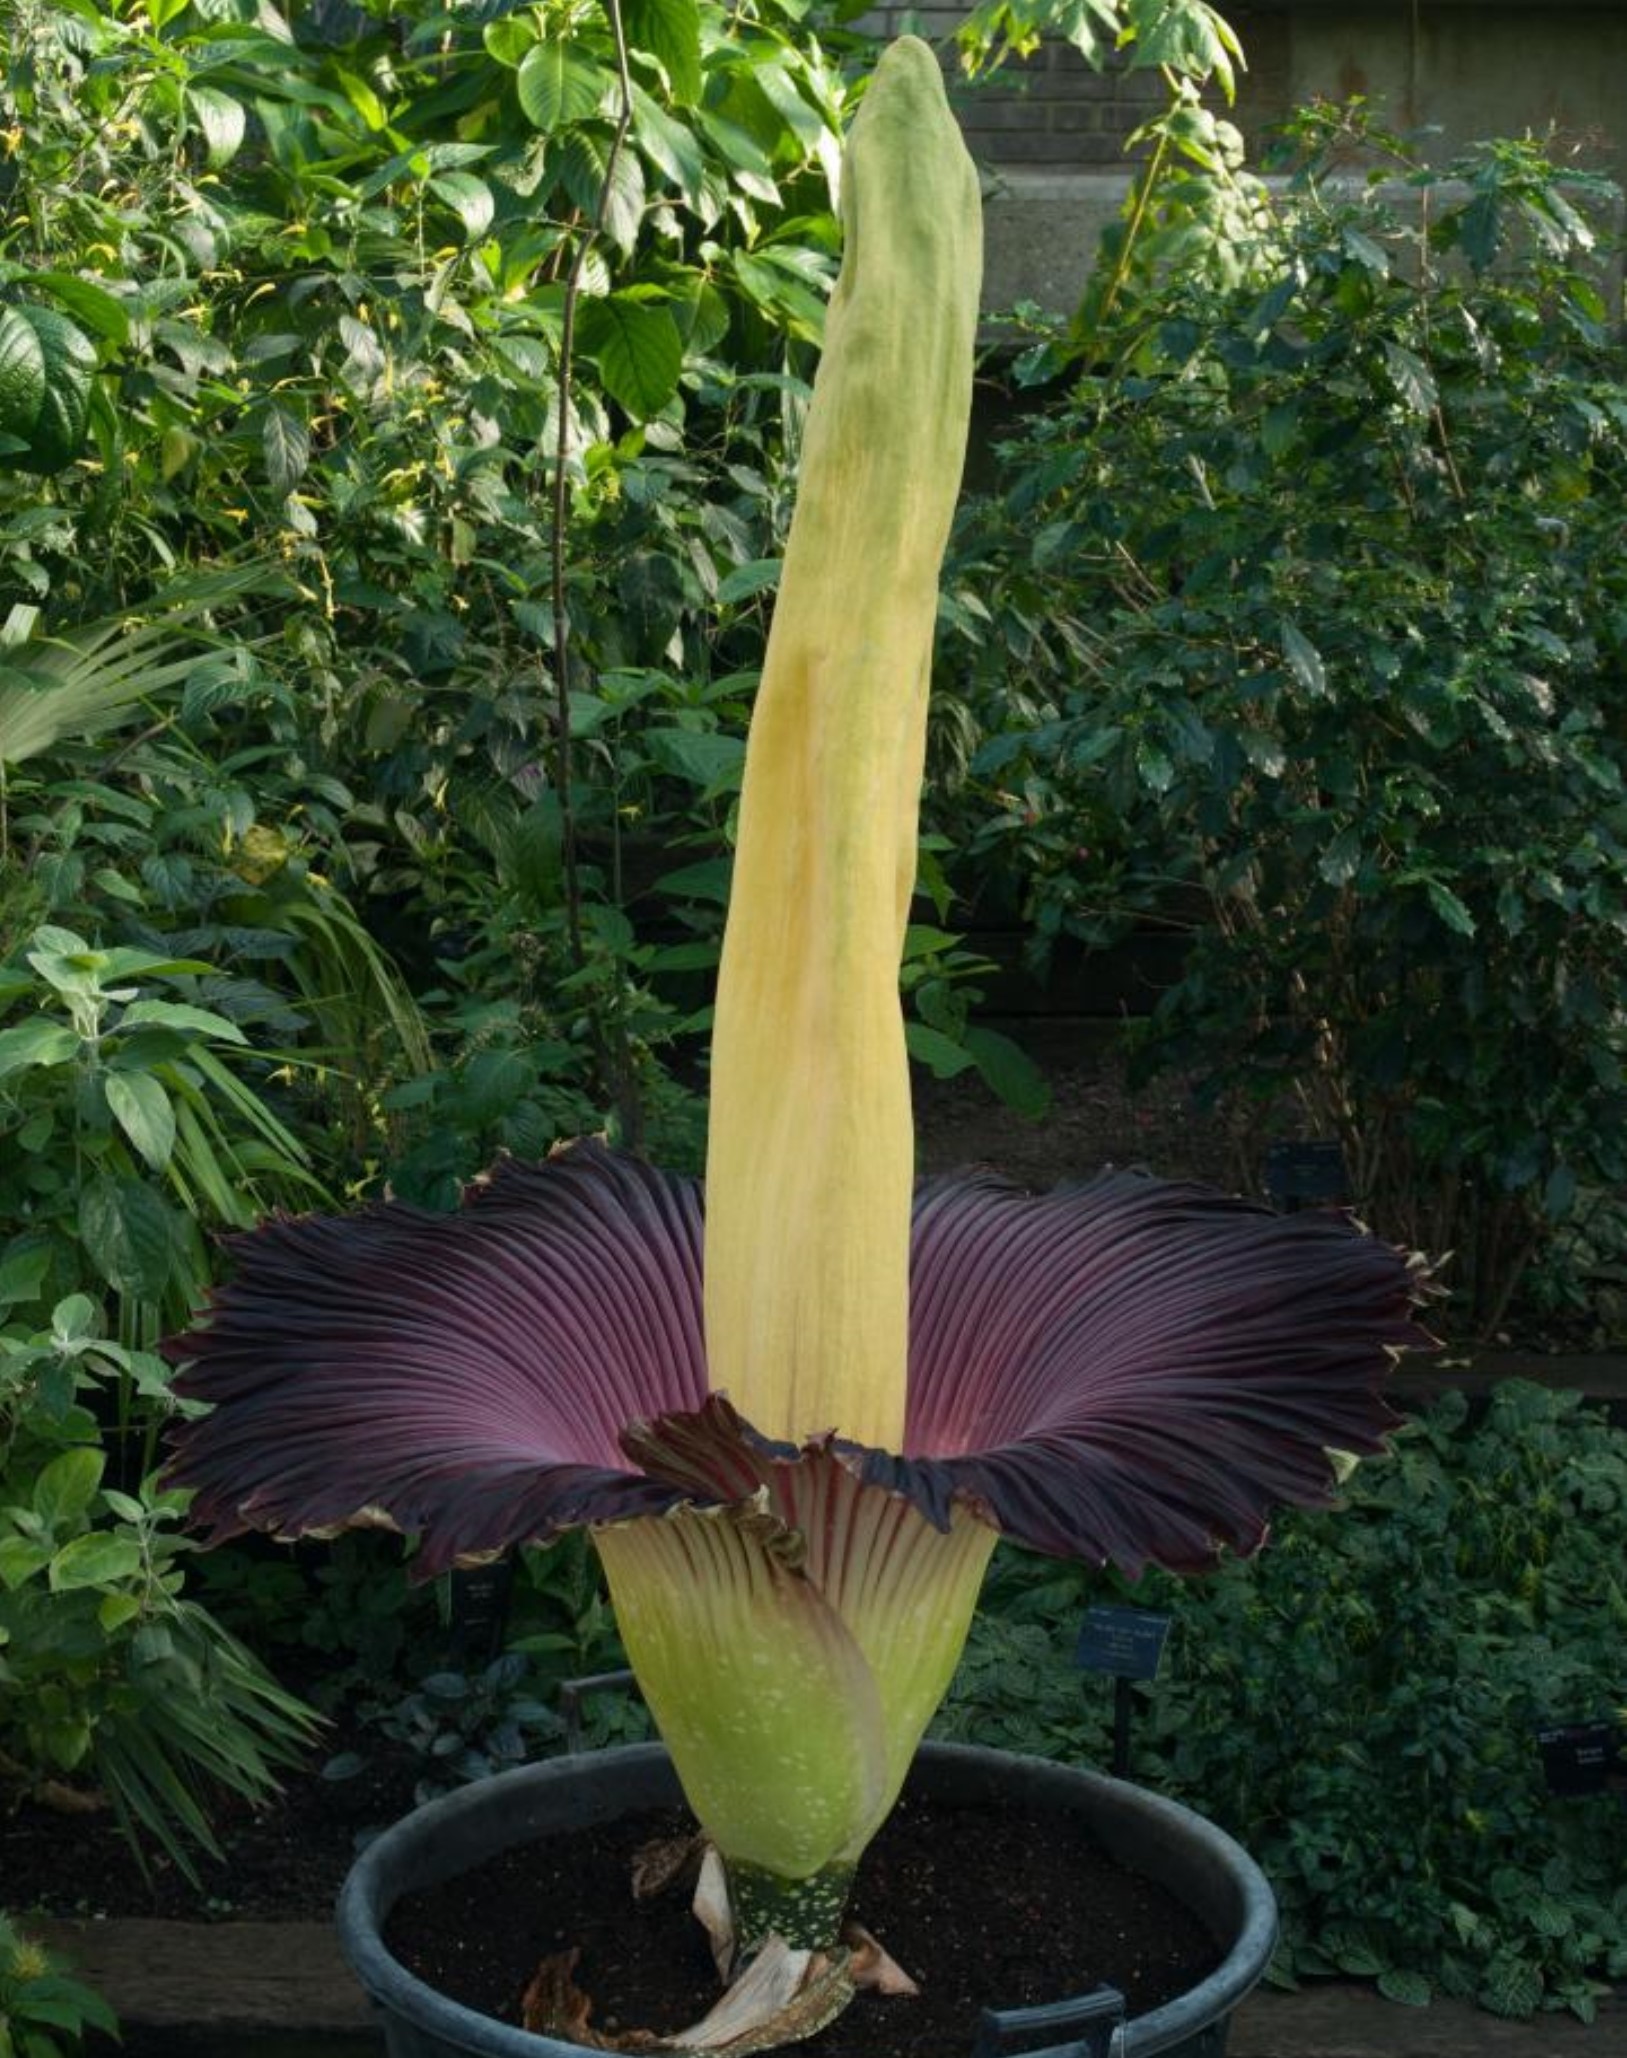 Titan arum (Amorphophallus titanum) in bloom with massive inner flower spike surrounded by a deep burgundy petal-like collar